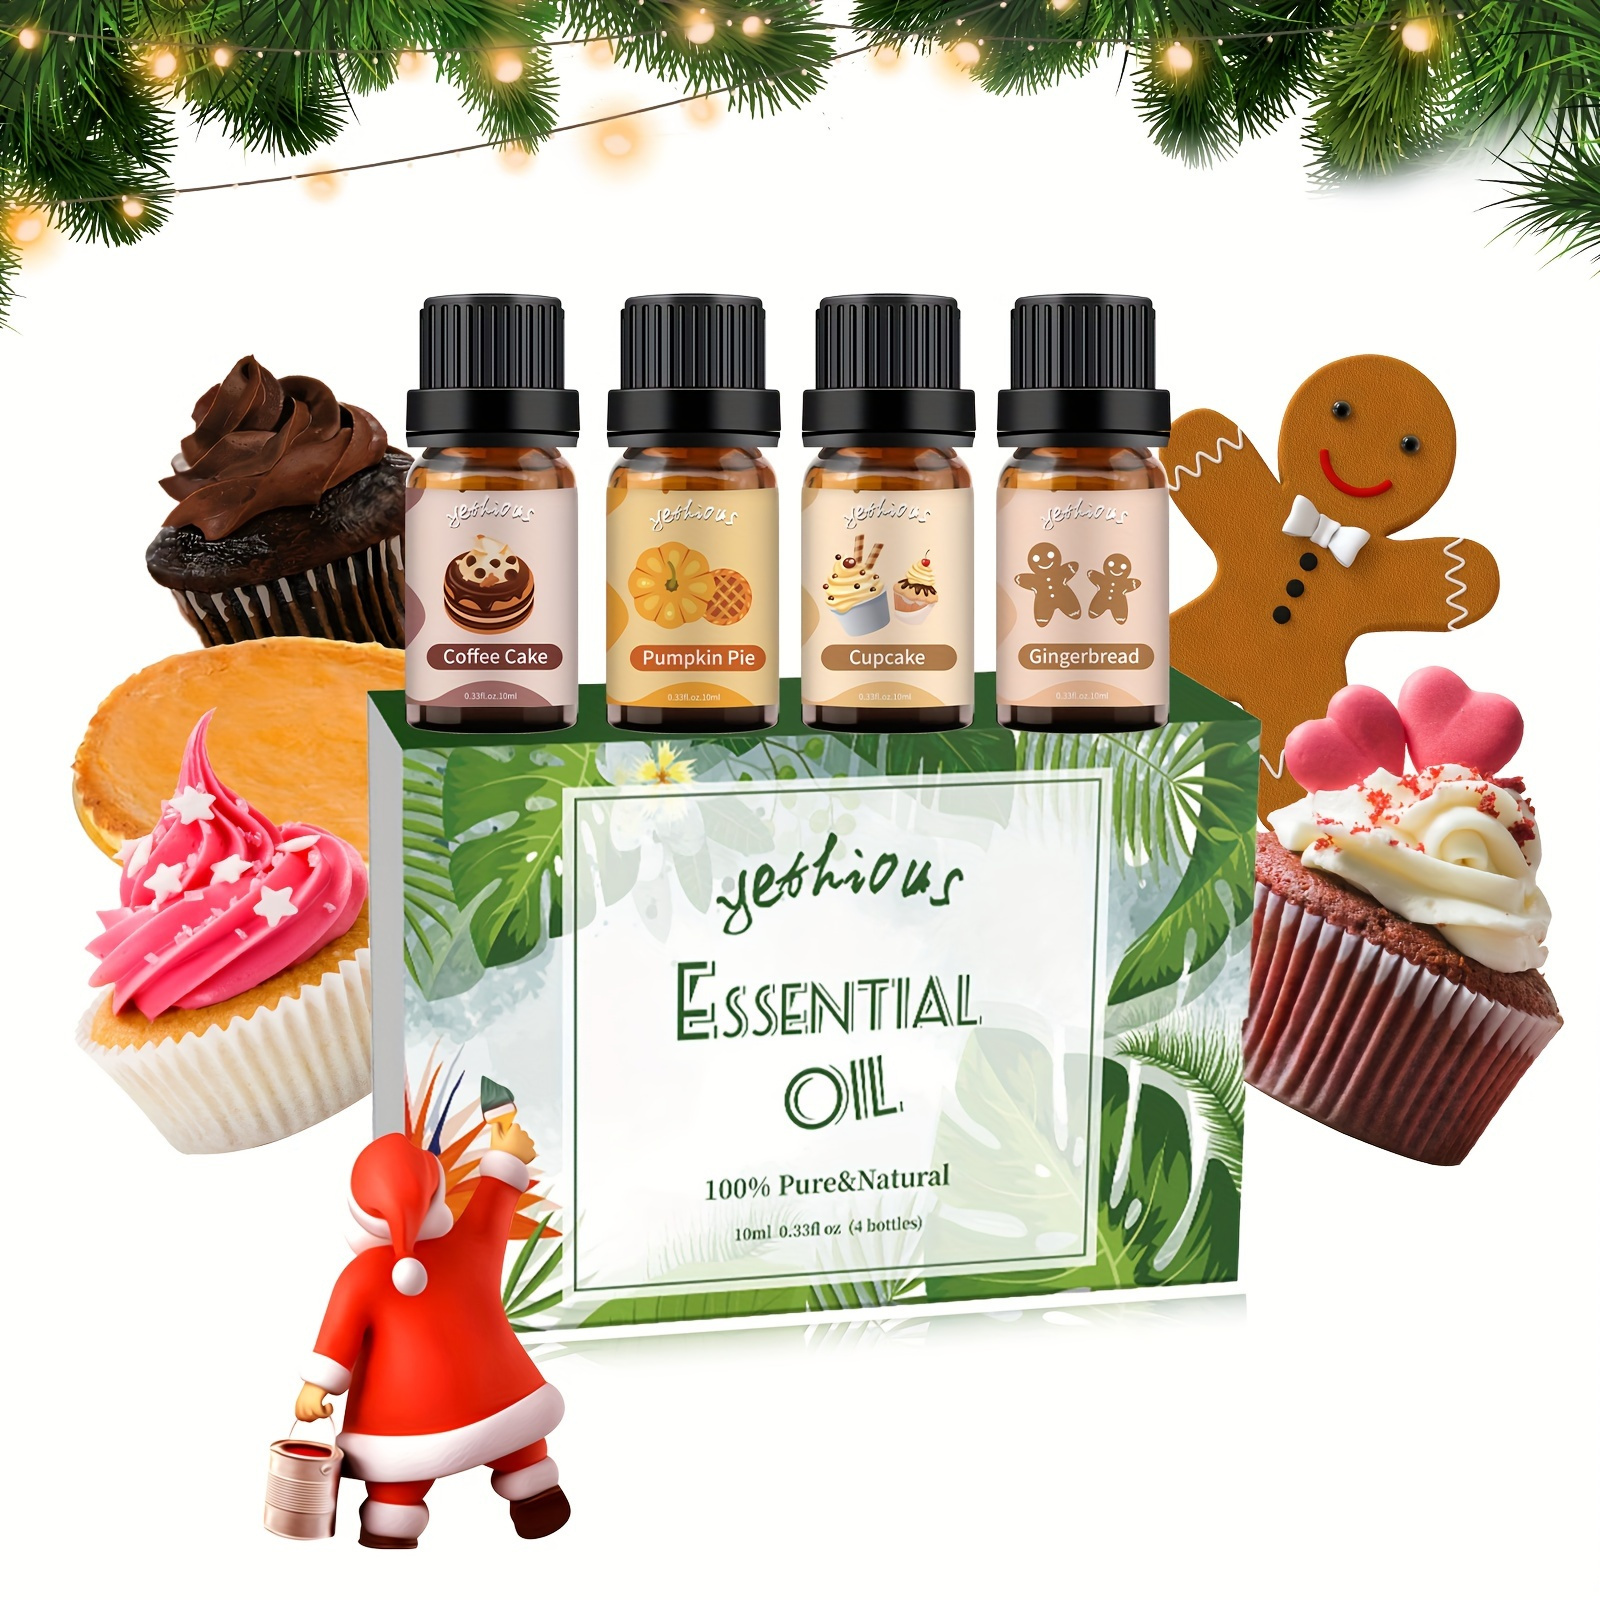 EUQEE Holiday Cheer Premium Fragrance Oils Set of 6 - Forest Pine,  Christmas Wreath, Brown Sugar, Harvest Spice, Gingerbread, Pumpkin Pie -  Scented